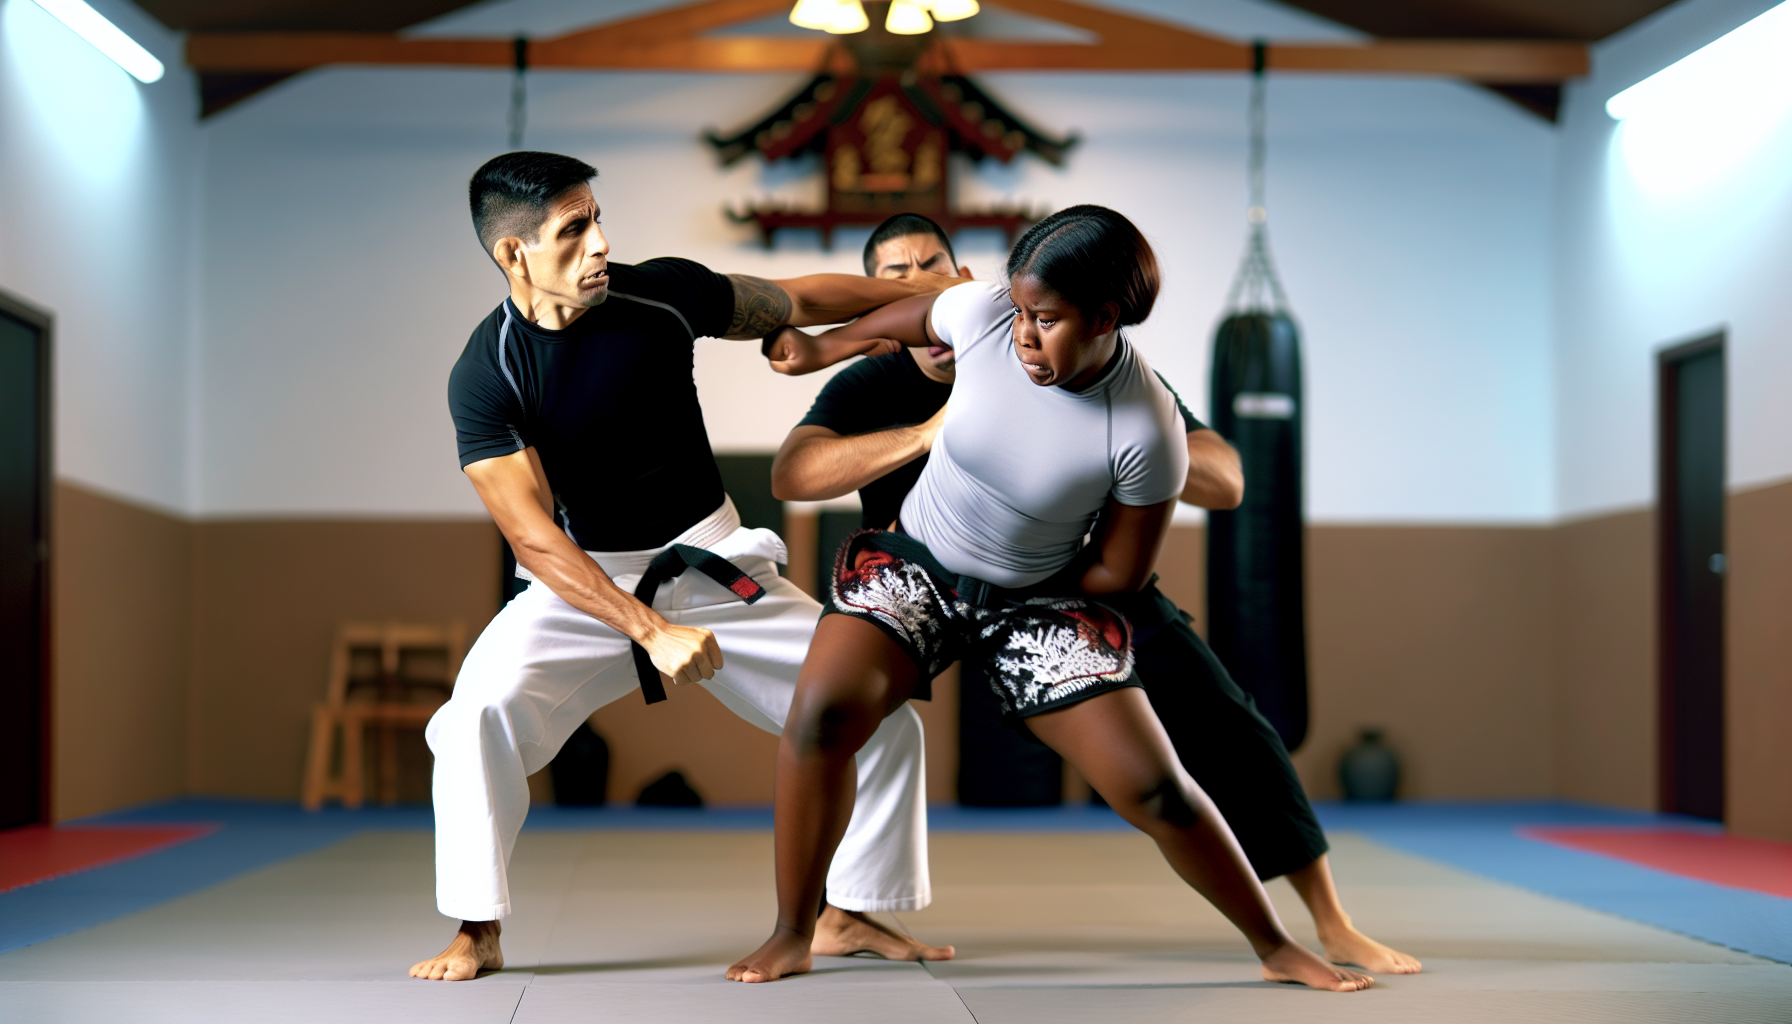 A Martial Artist Demonstrating The Rubber Guard Technique